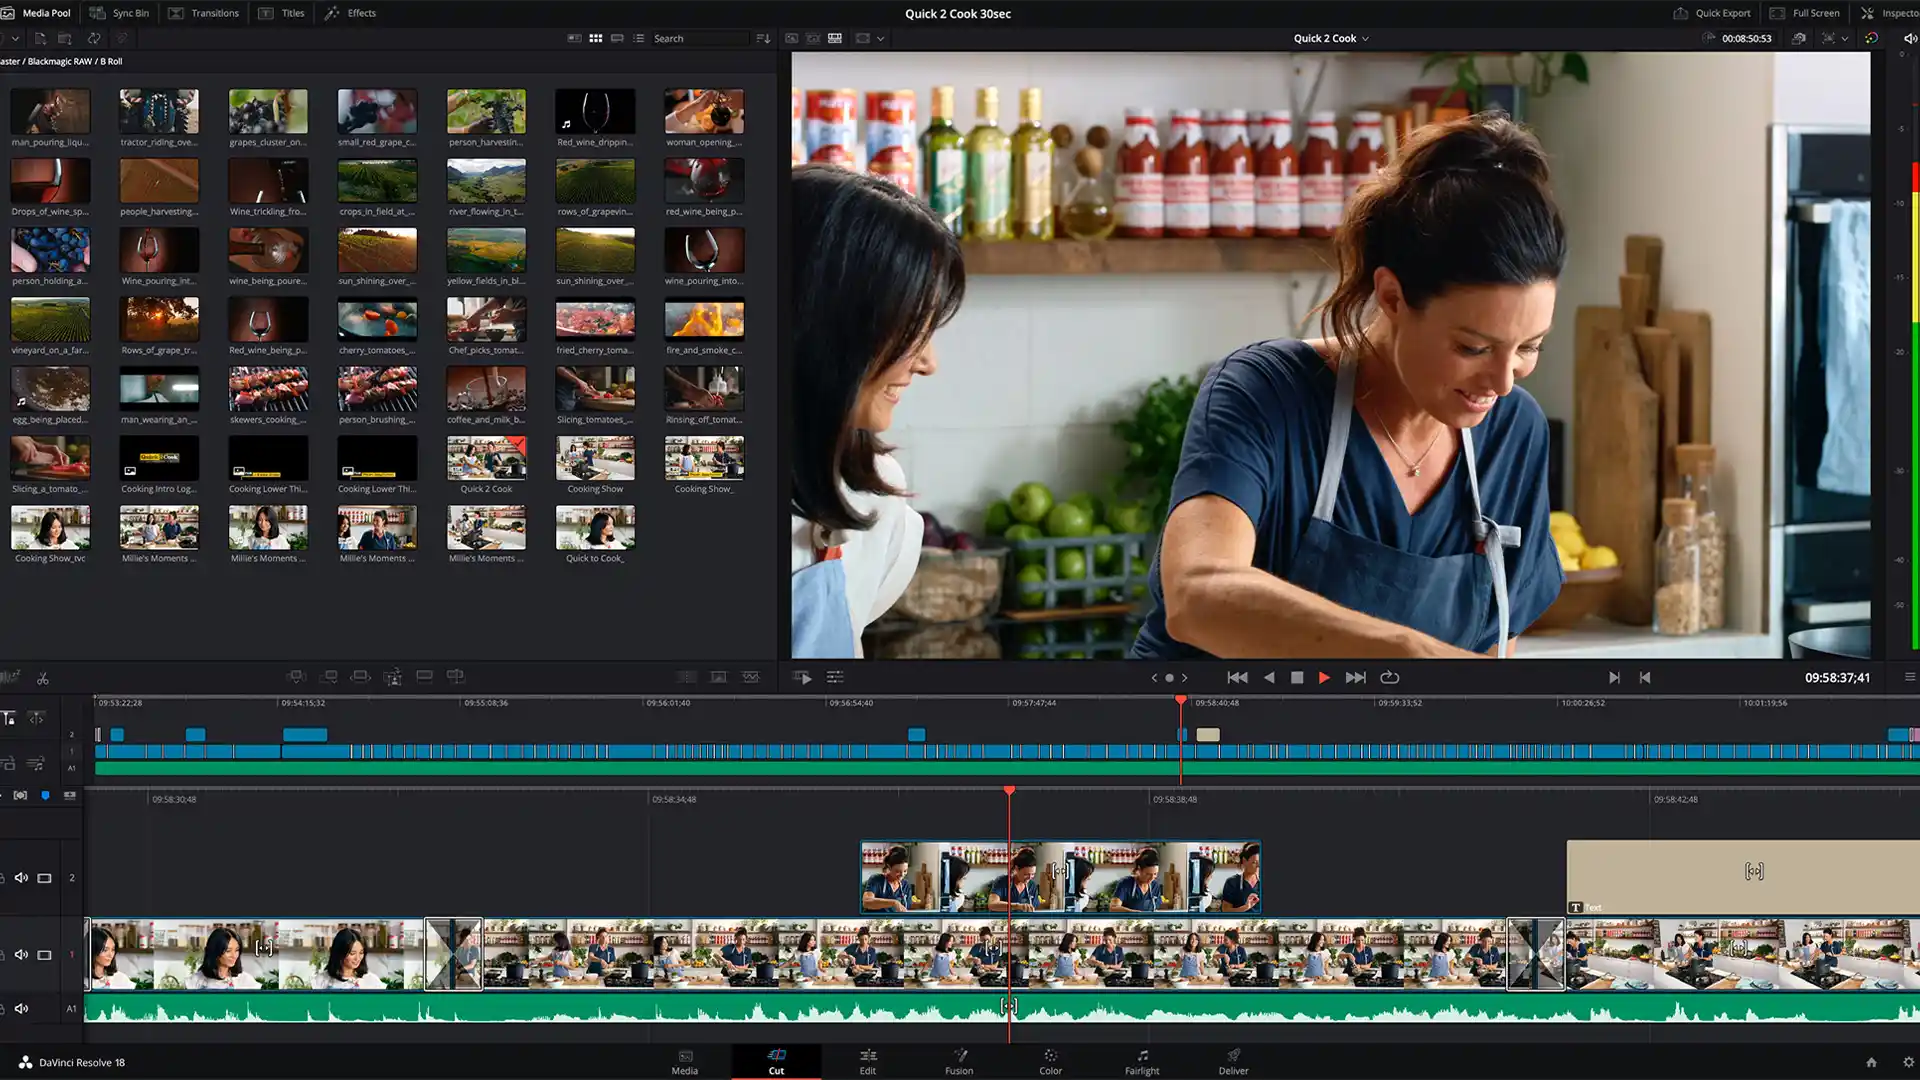 DaVinci Resolve - The best free video editing software for pros